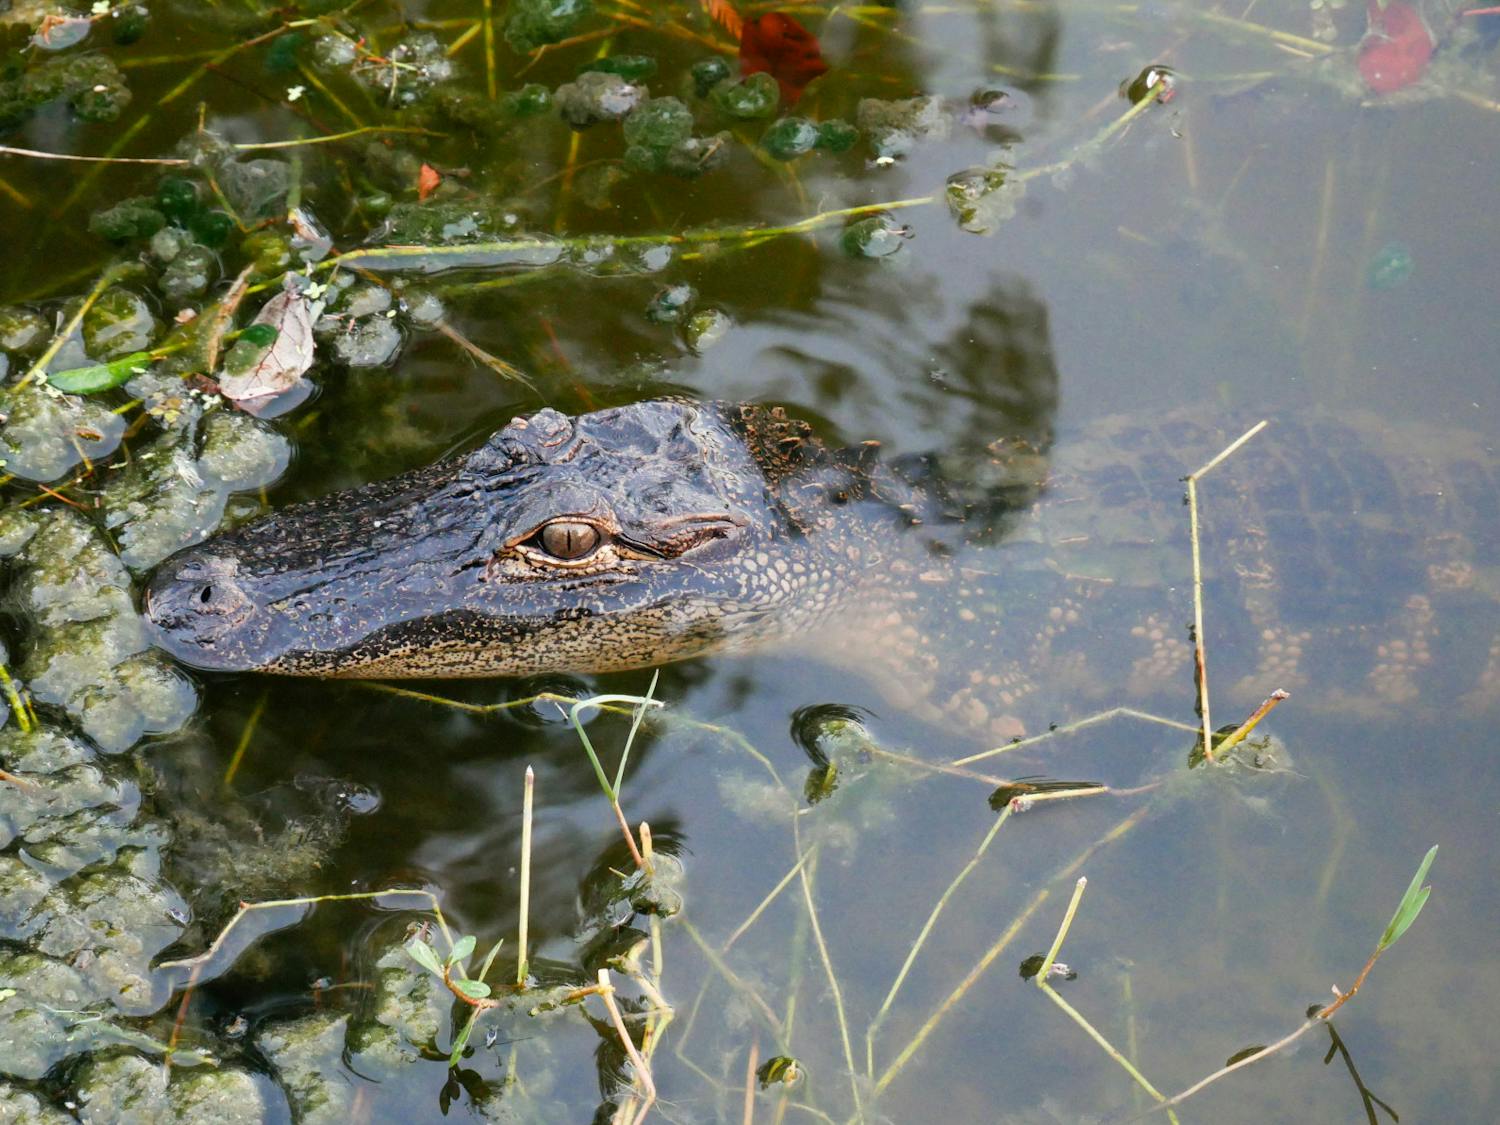  A young alligator drifts near the shore of Lake Alice on Wednesday, Oct. 6, 2023.